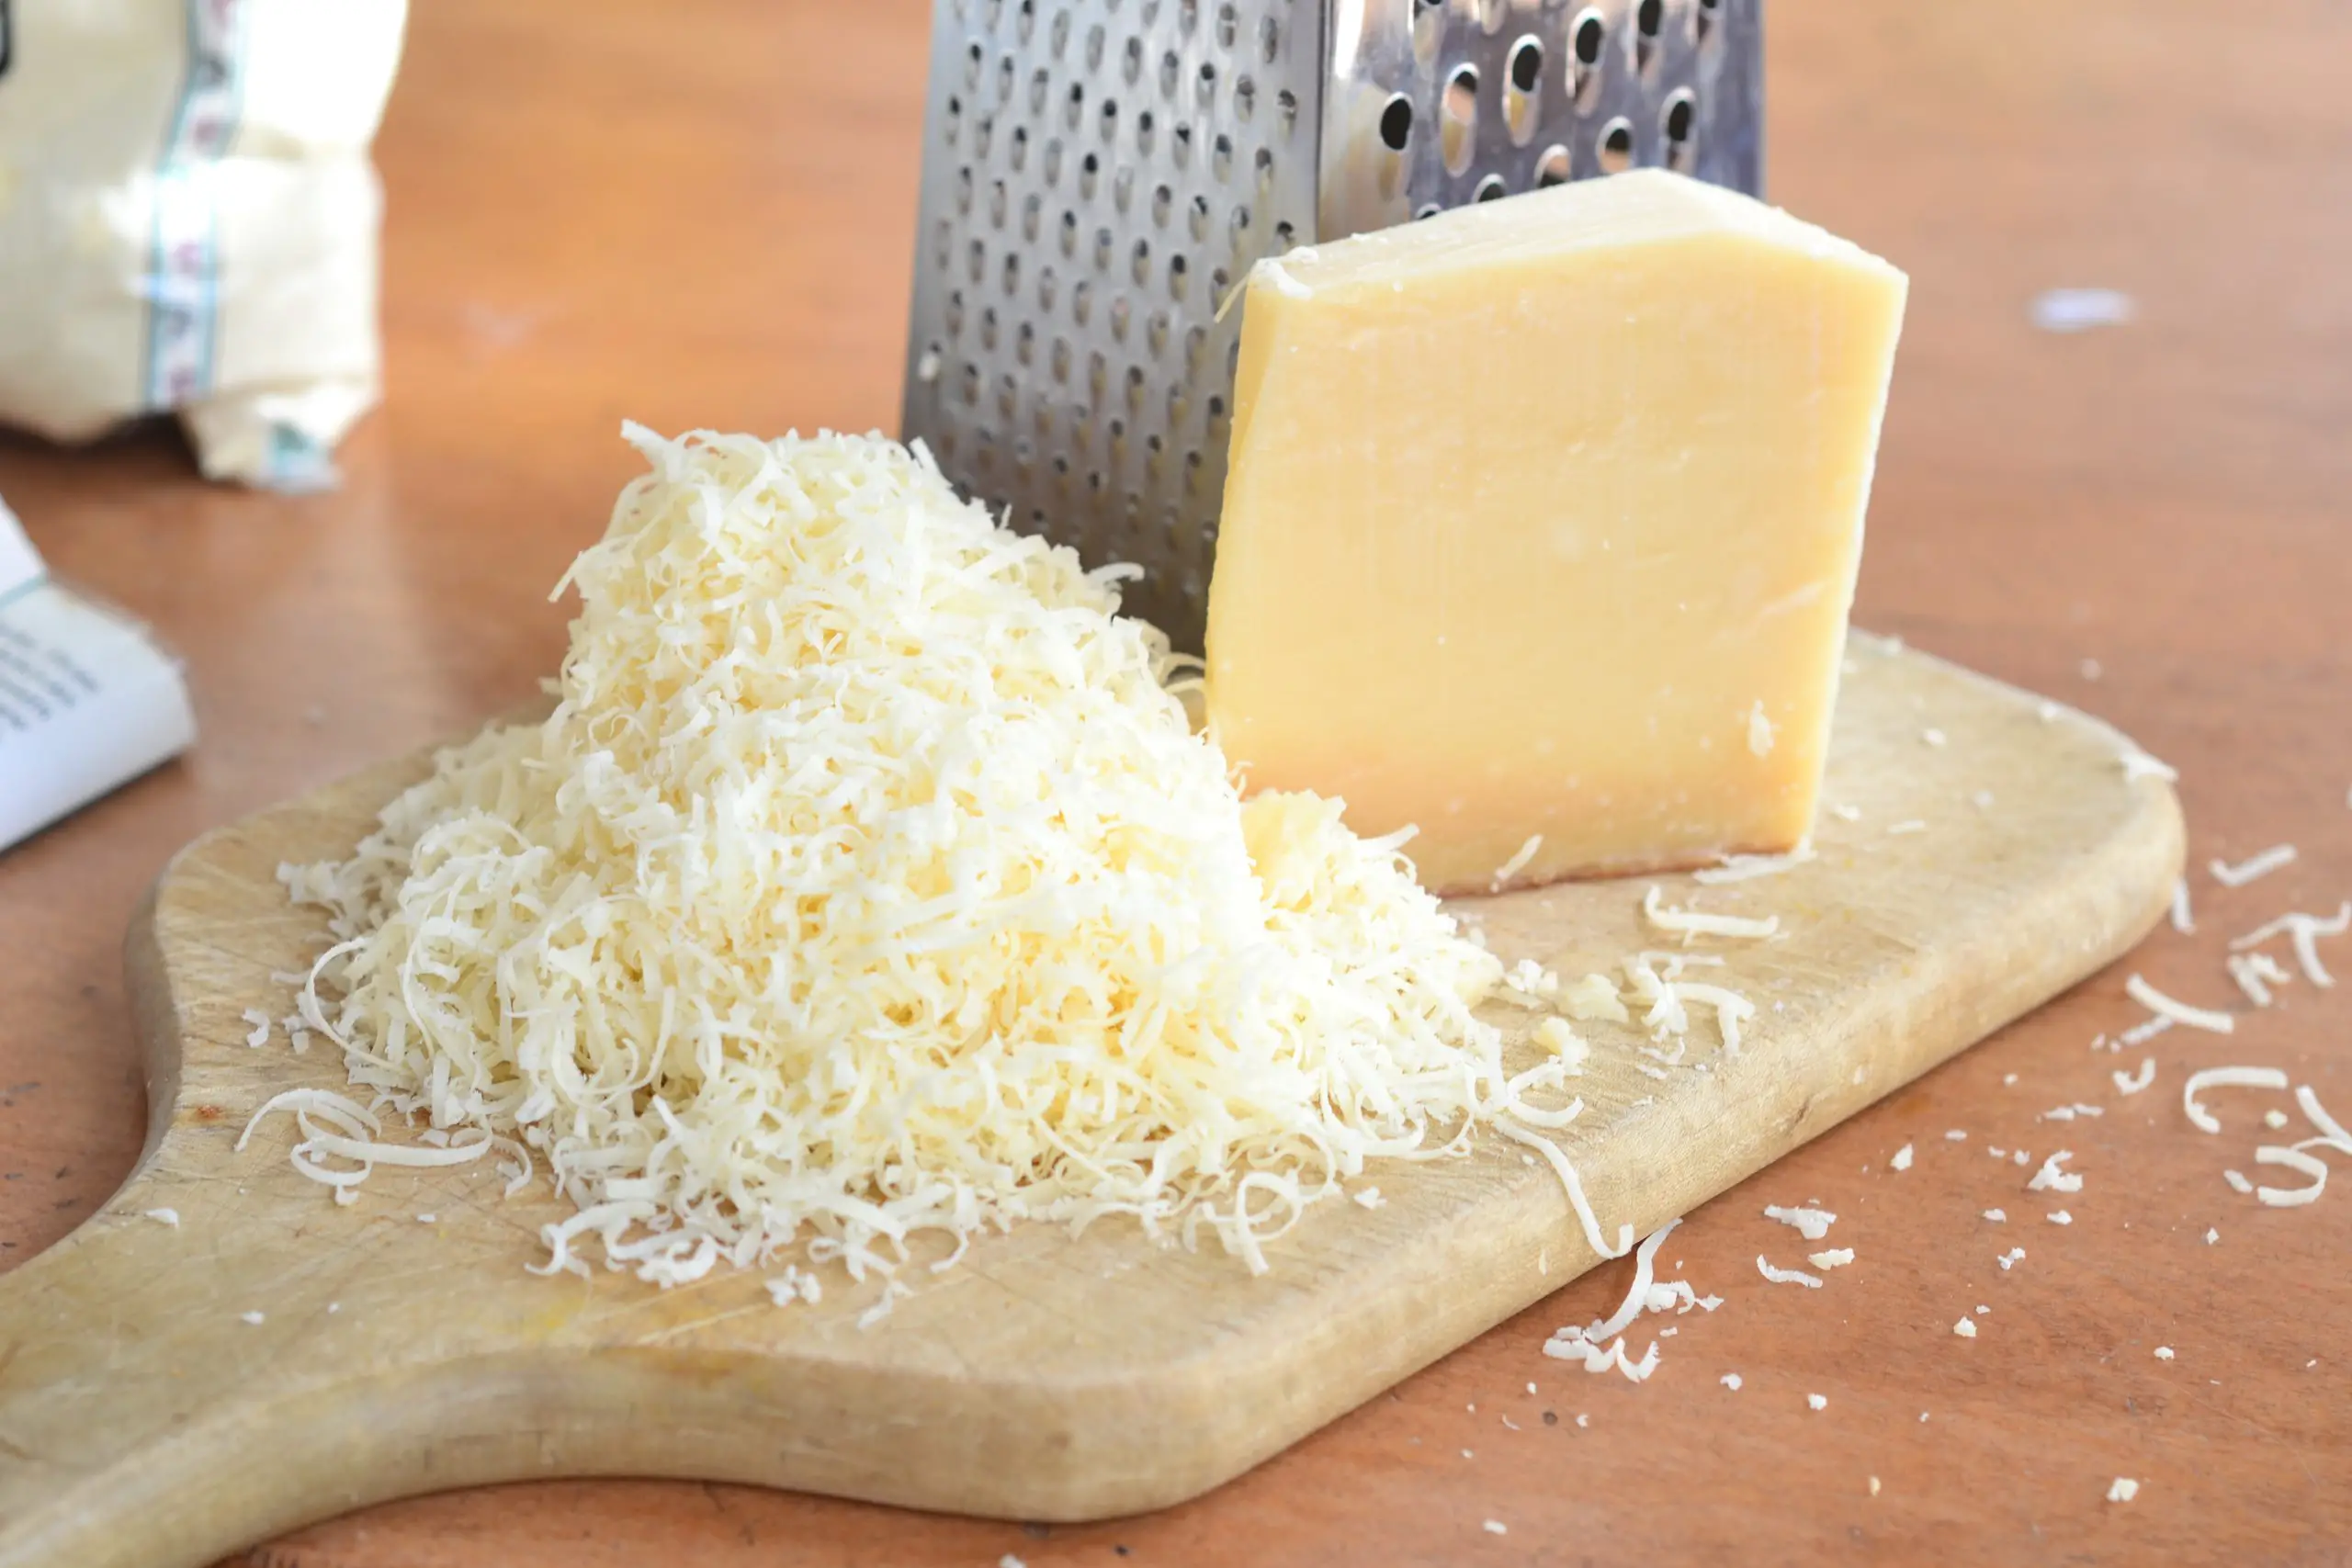 AVOID! Grated Parmesan Cheese Contains Wood Cellulose ...